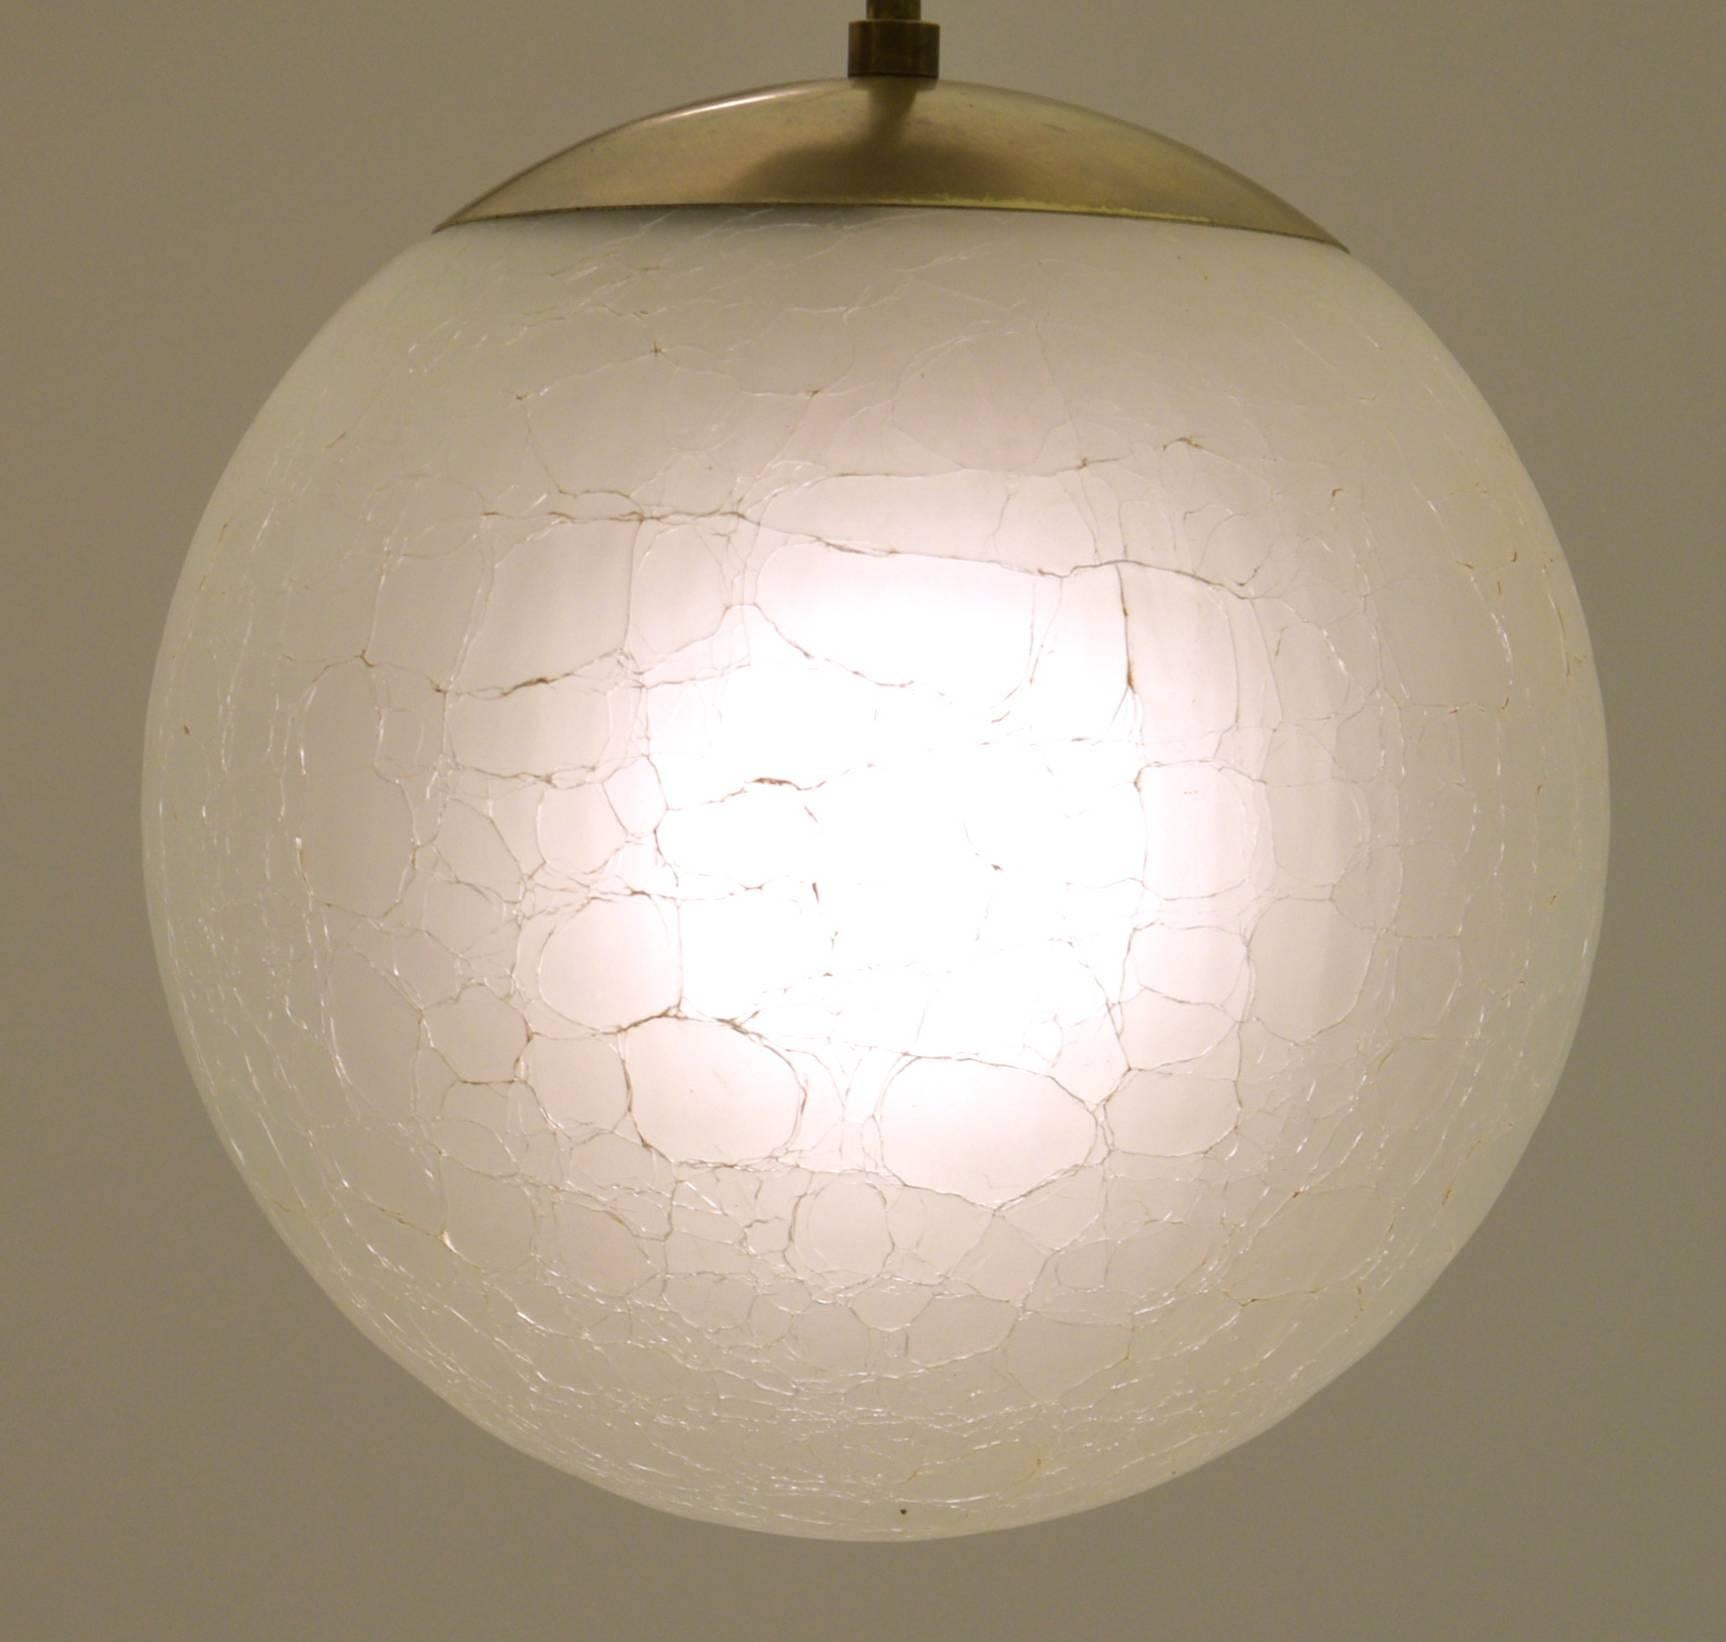 A unique heavy crackled glass produced in Italy for Moe and assembled in the USA, this pendant lamp is a fine example of italian glass workmanship and American brass manufacturing for the components. The stem has a solid brass pivot meaning the